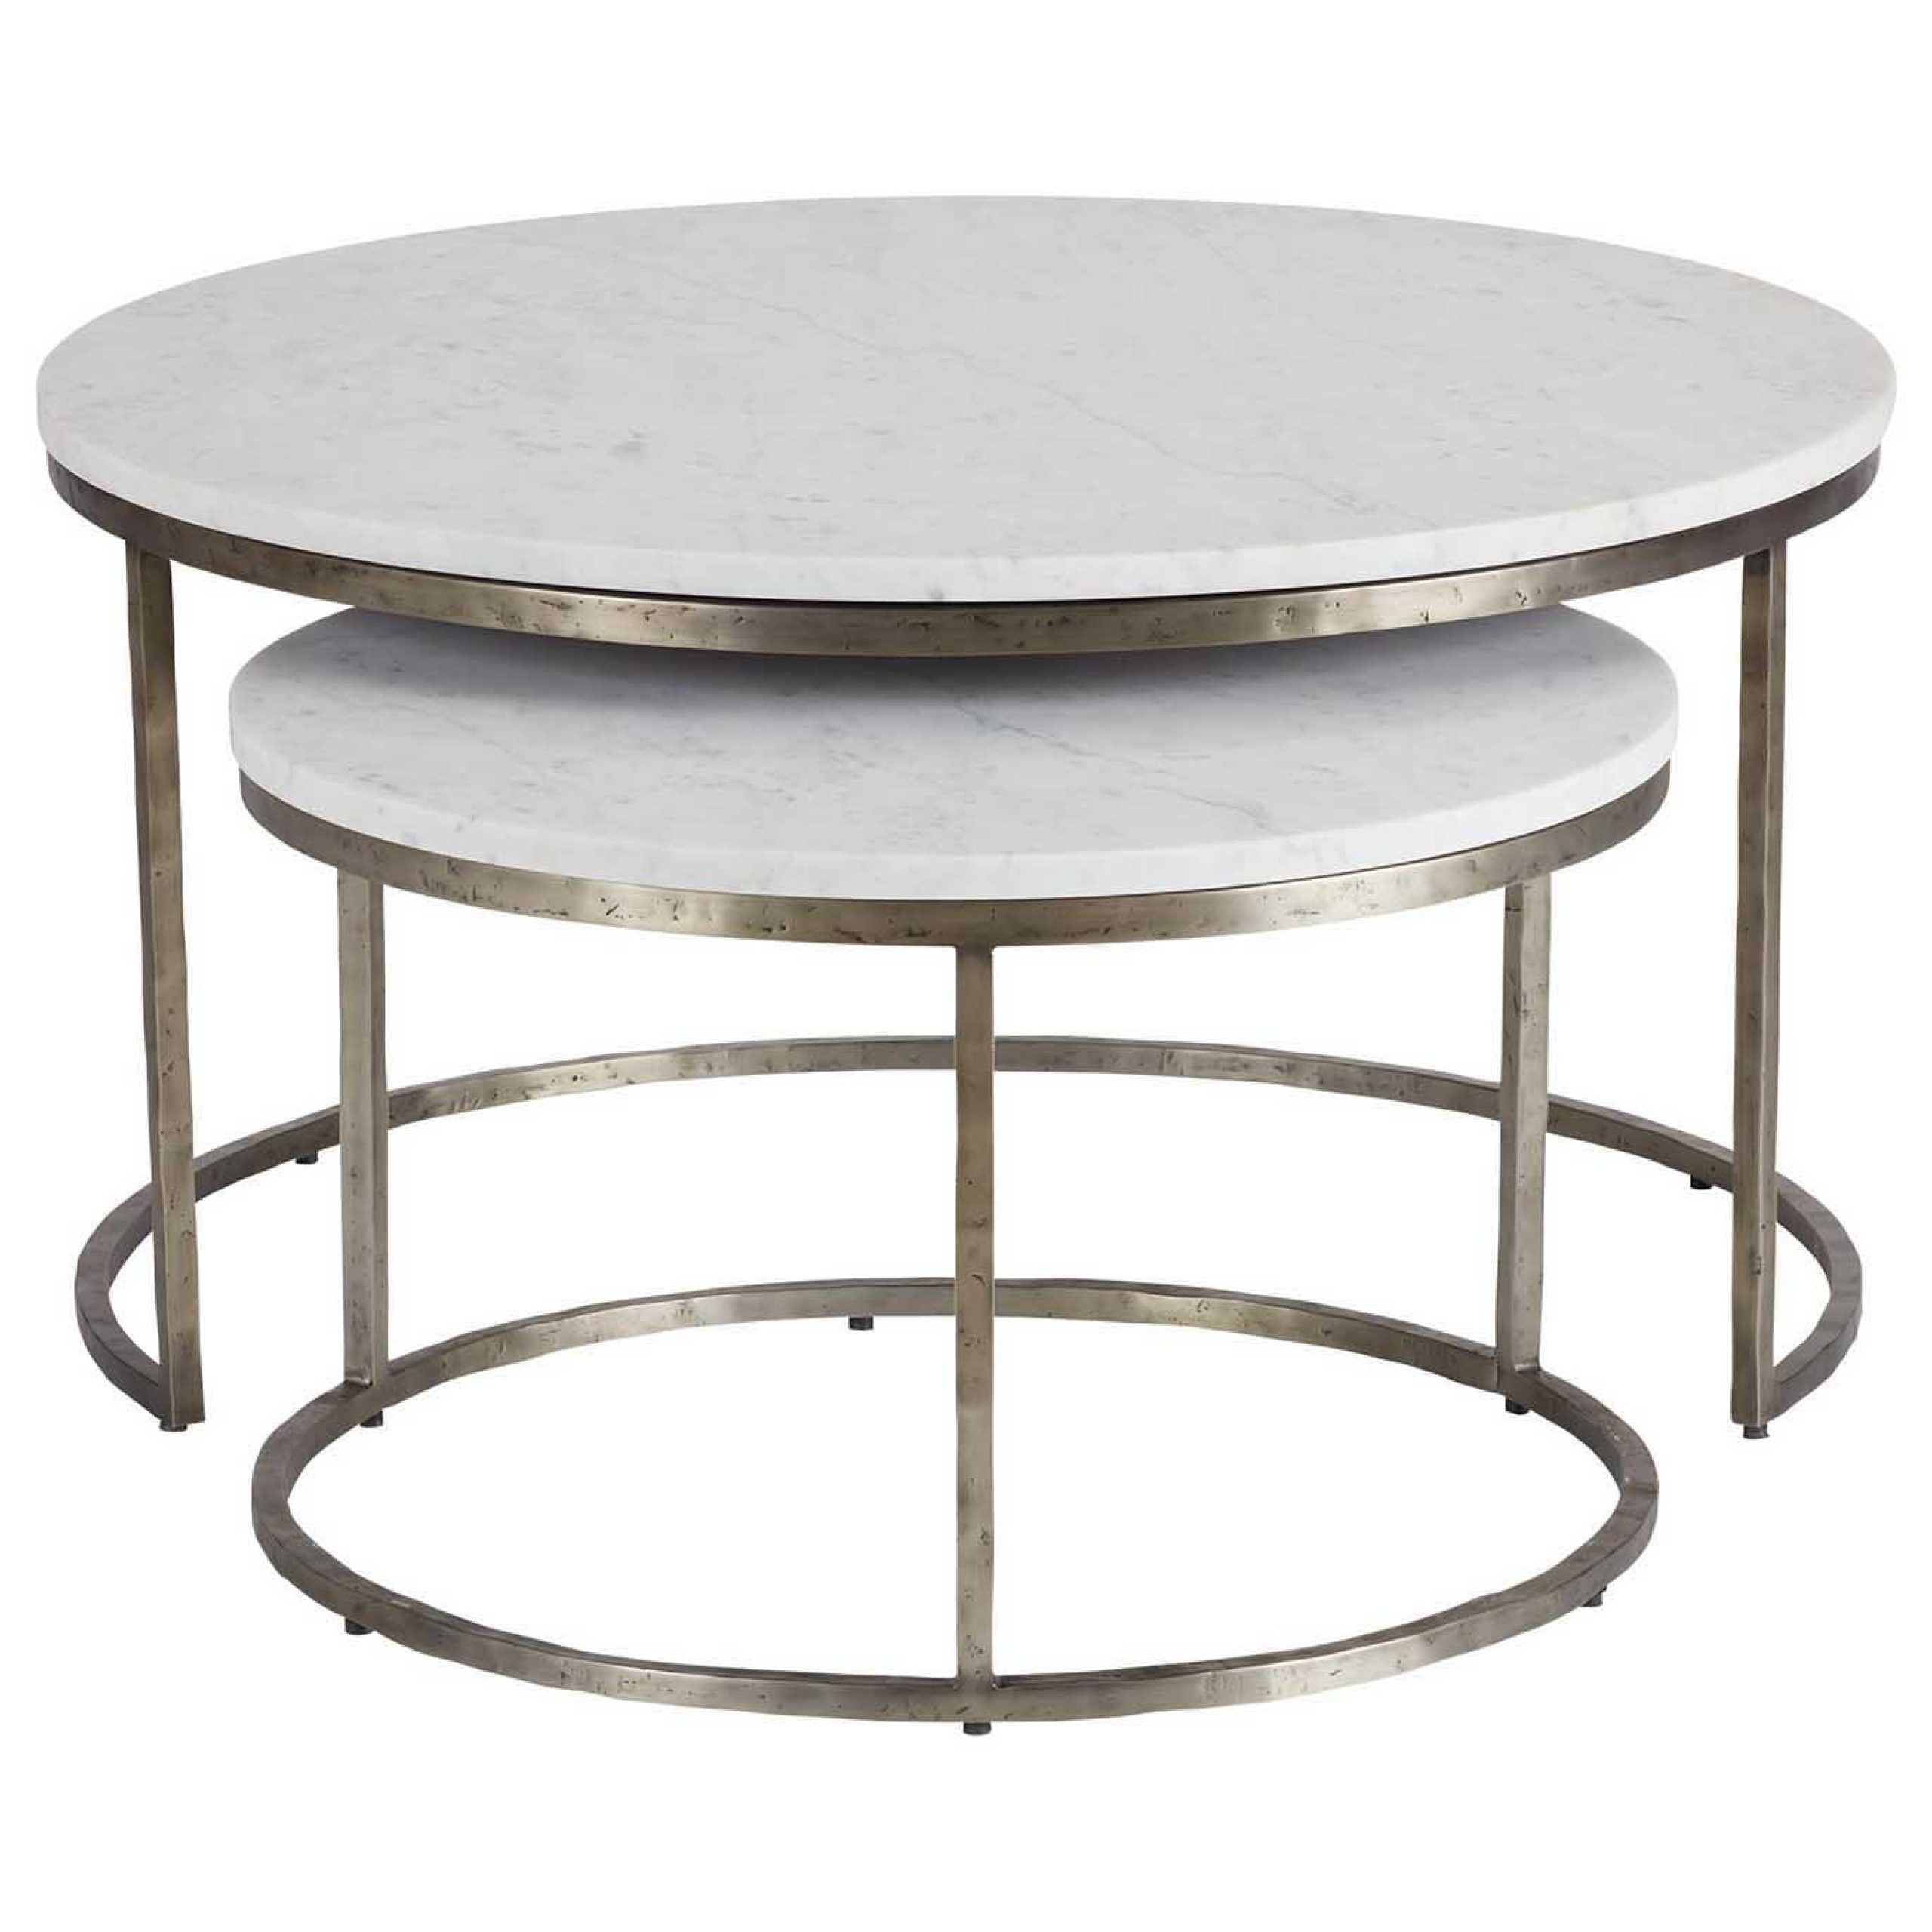 Bayliss Marble Top Coffee Table | Nesting Table | Ethan Allen For Nesting Coffee Tables (View 15 of 15)